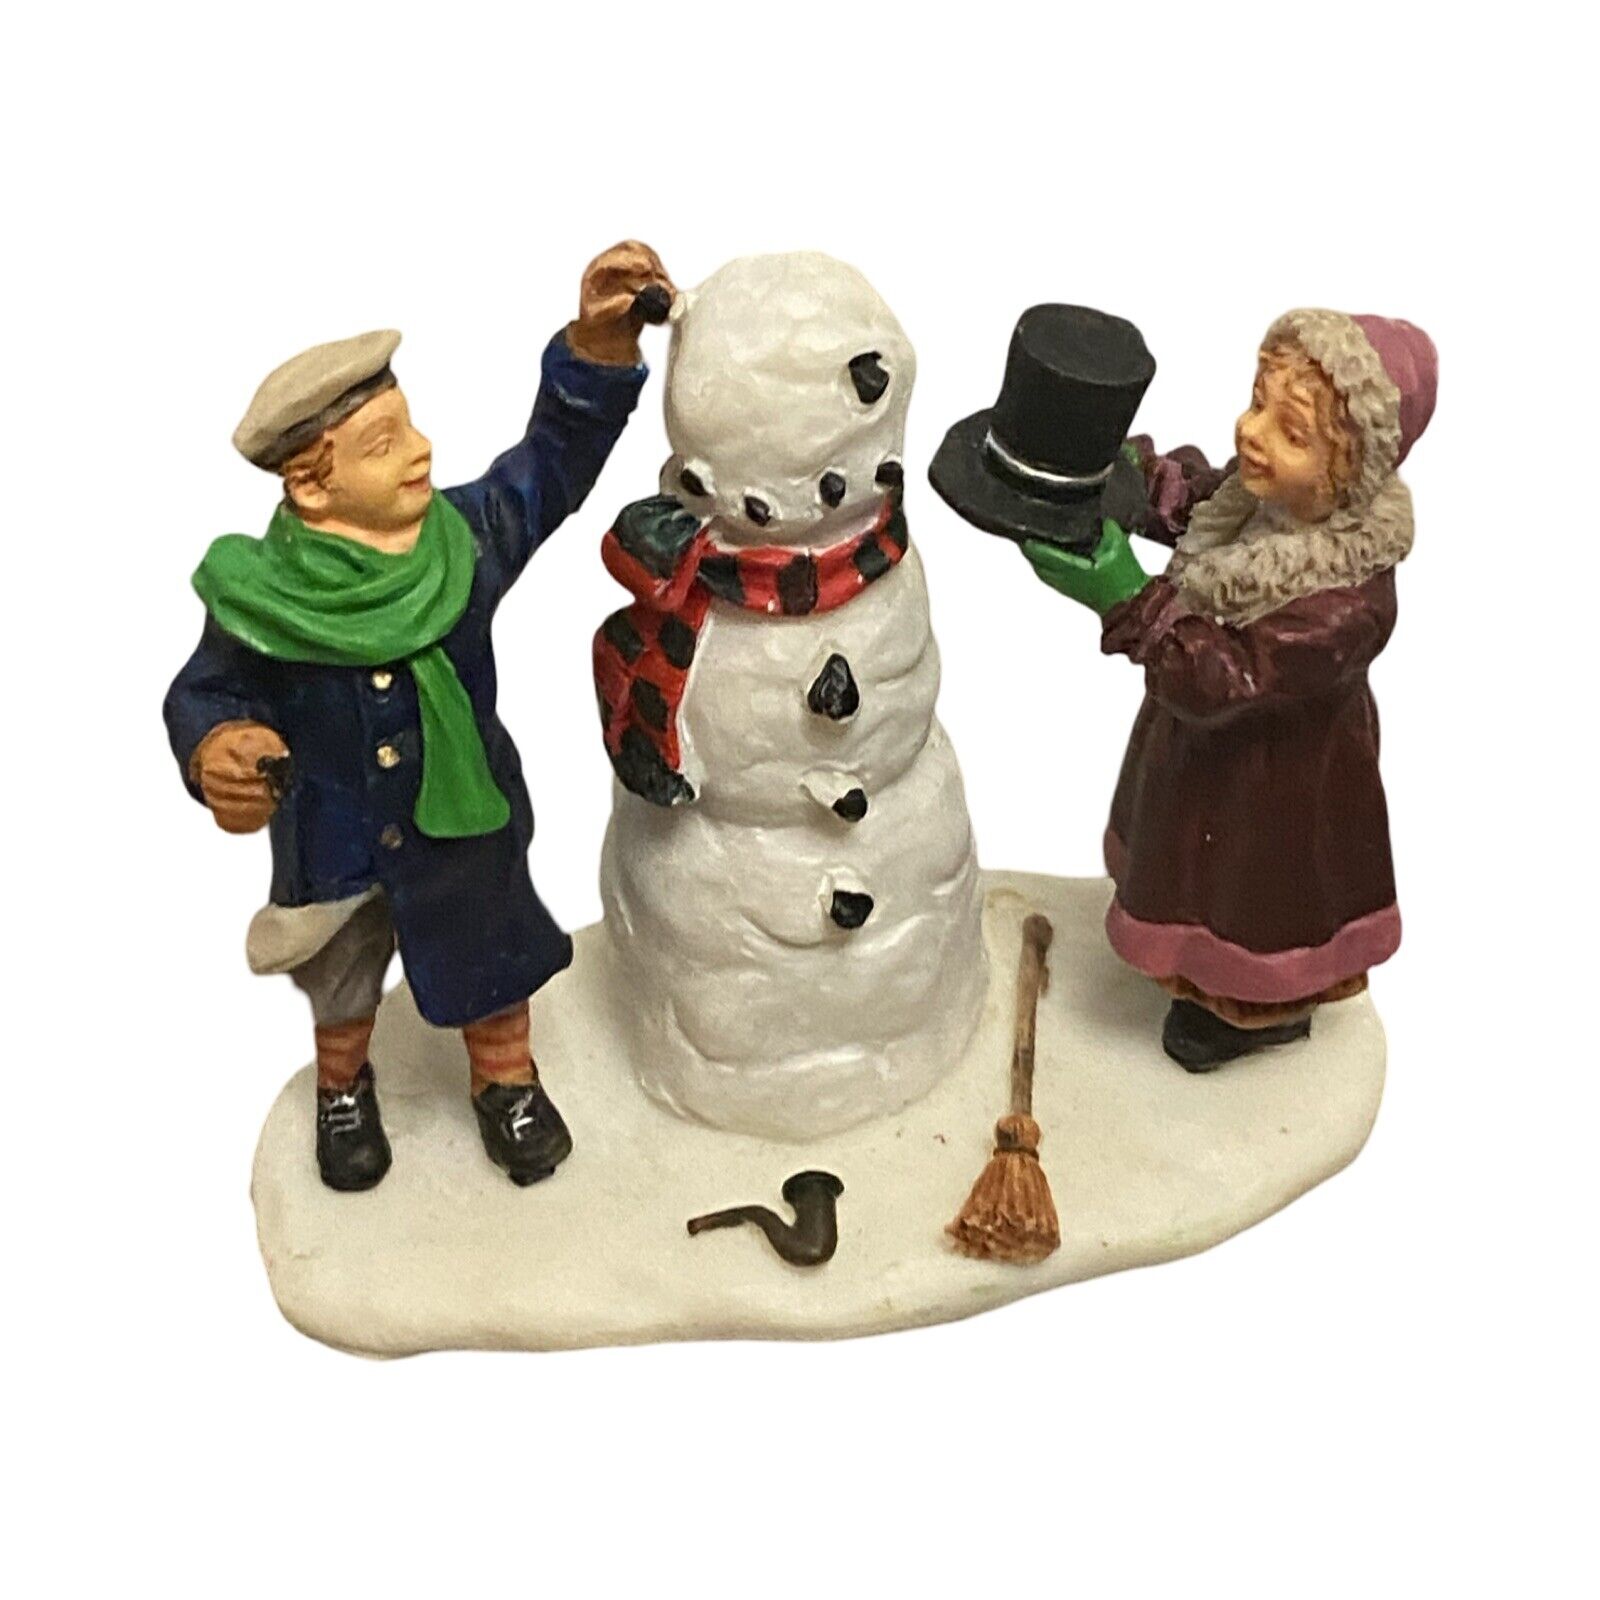 Lemax Memory Makers Collection Our Snowman #77014 Making A Snowman Figurine 1997